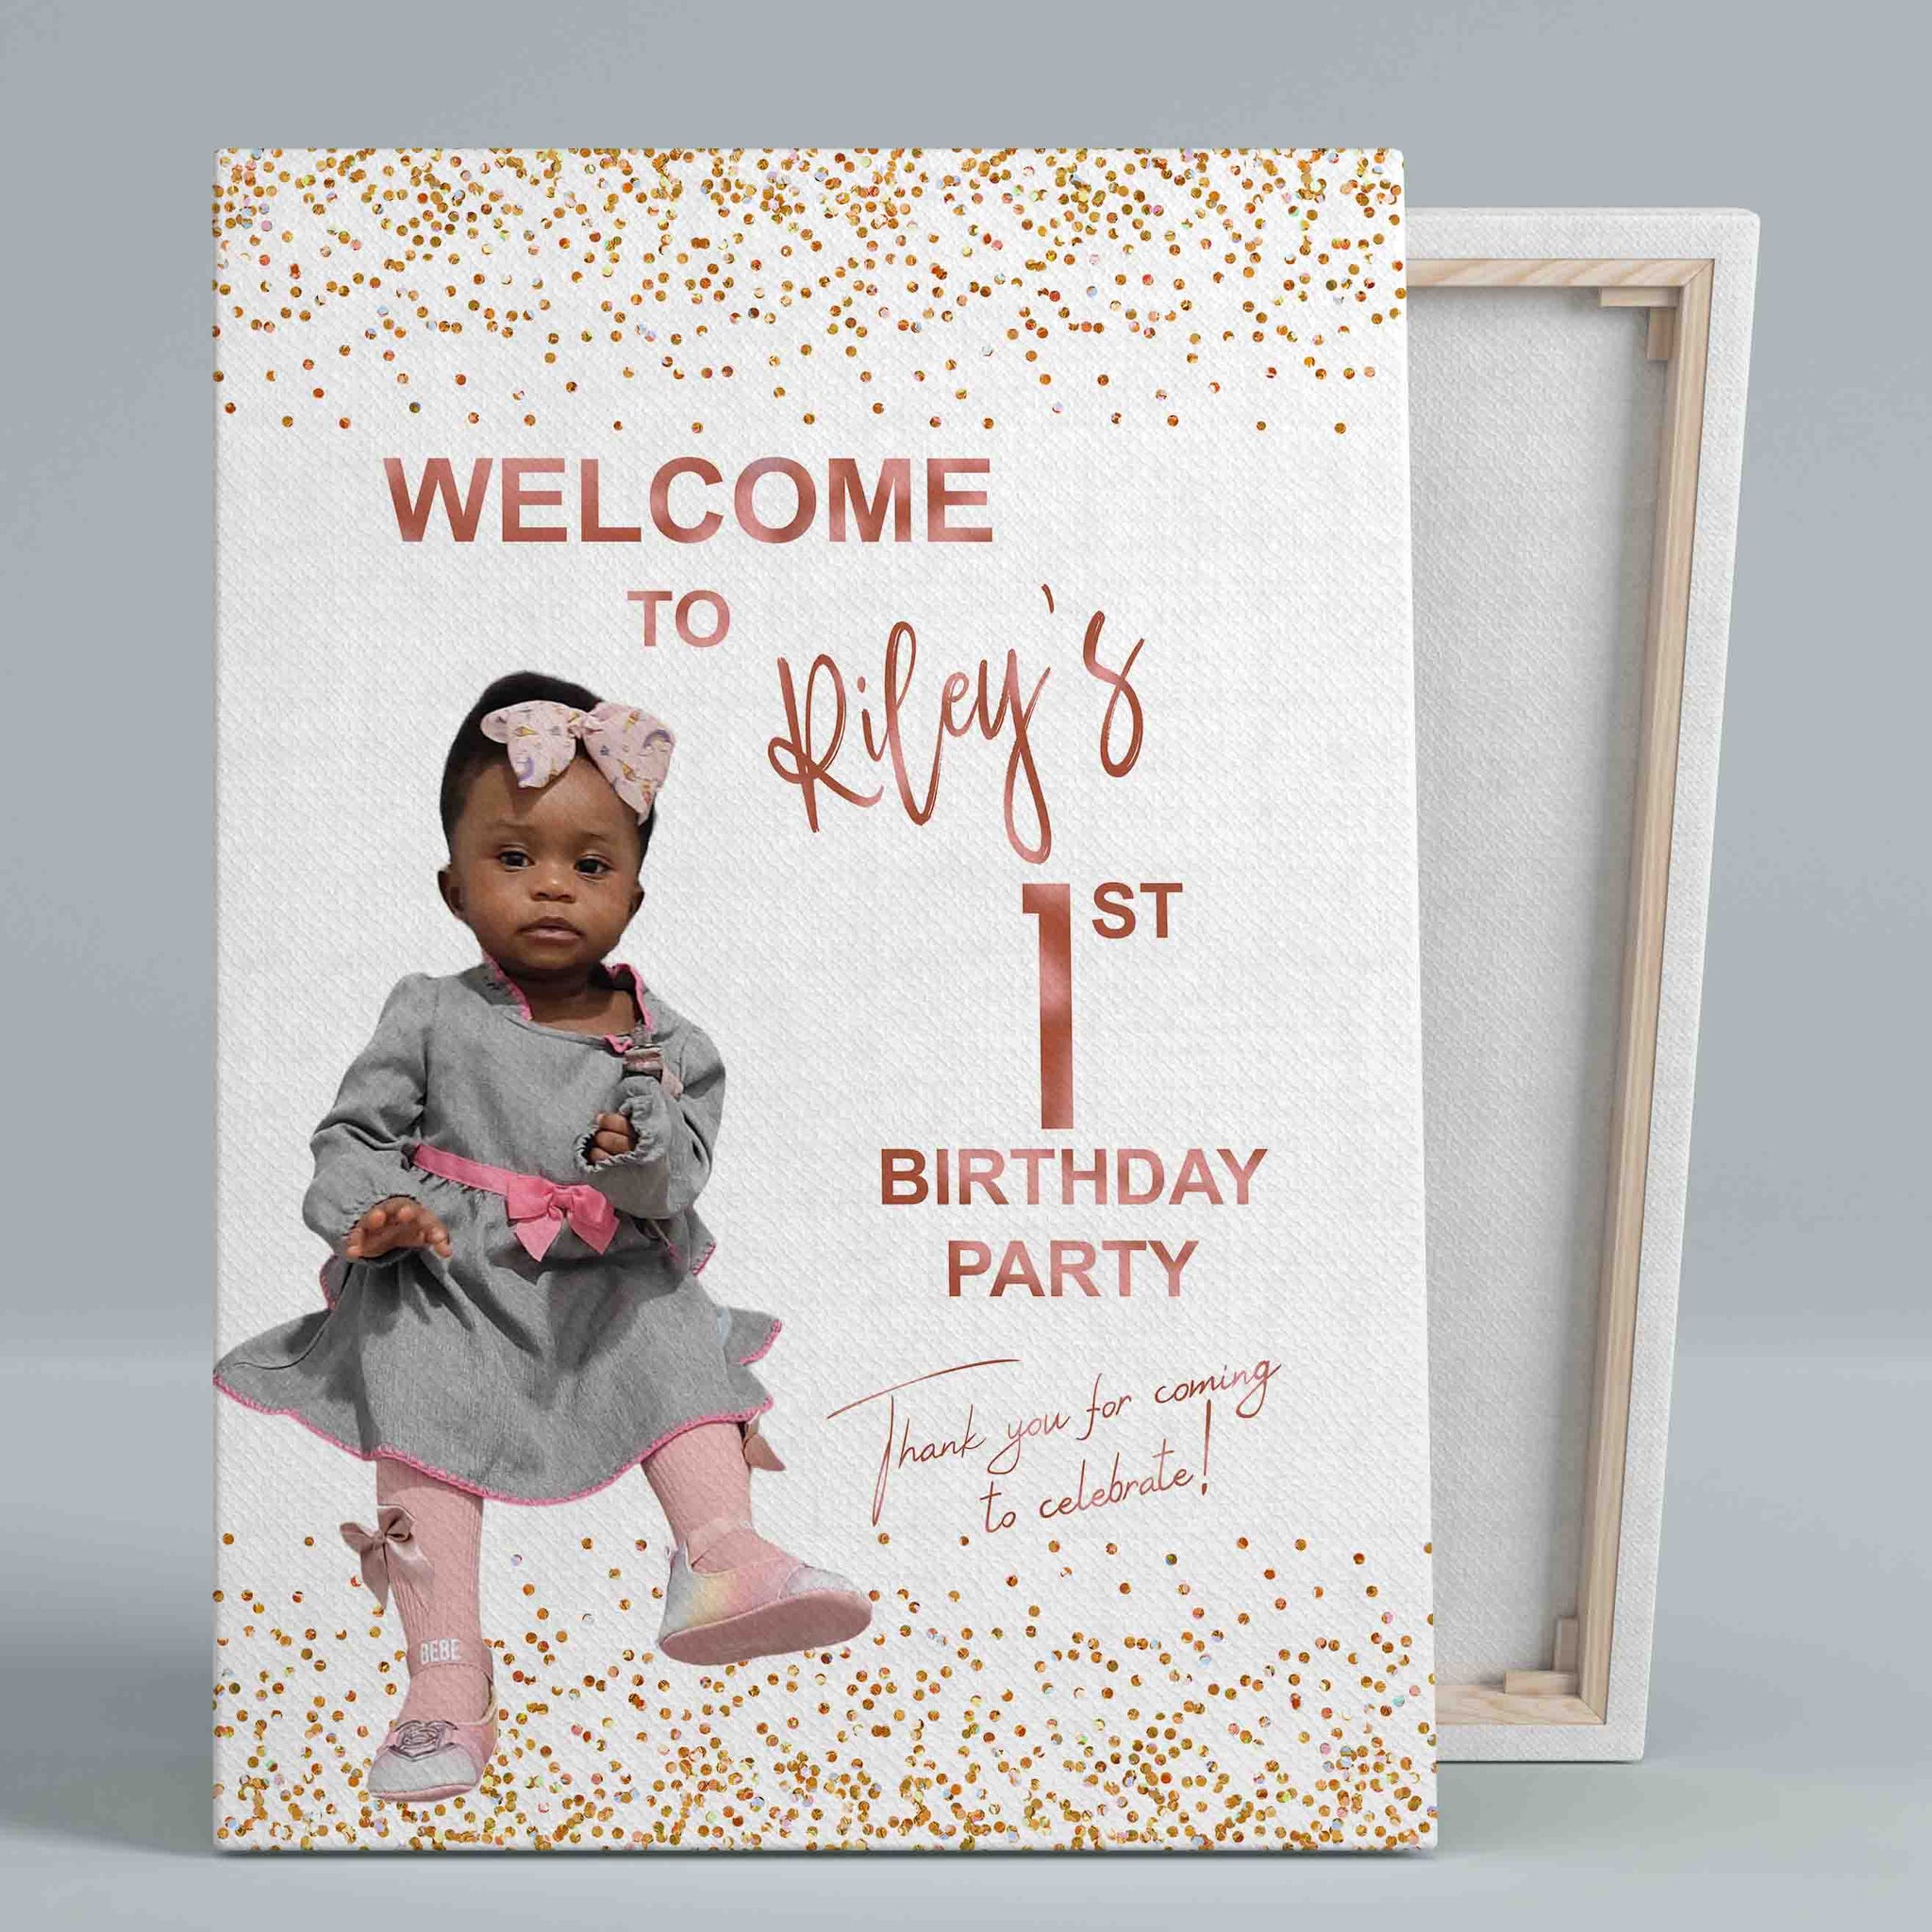 Welcome To Birthday Party Canvas, Birthday Party Canvas, Custom Image Canvas, Custom Baby Canvas, Best Gift Canvas For Baby